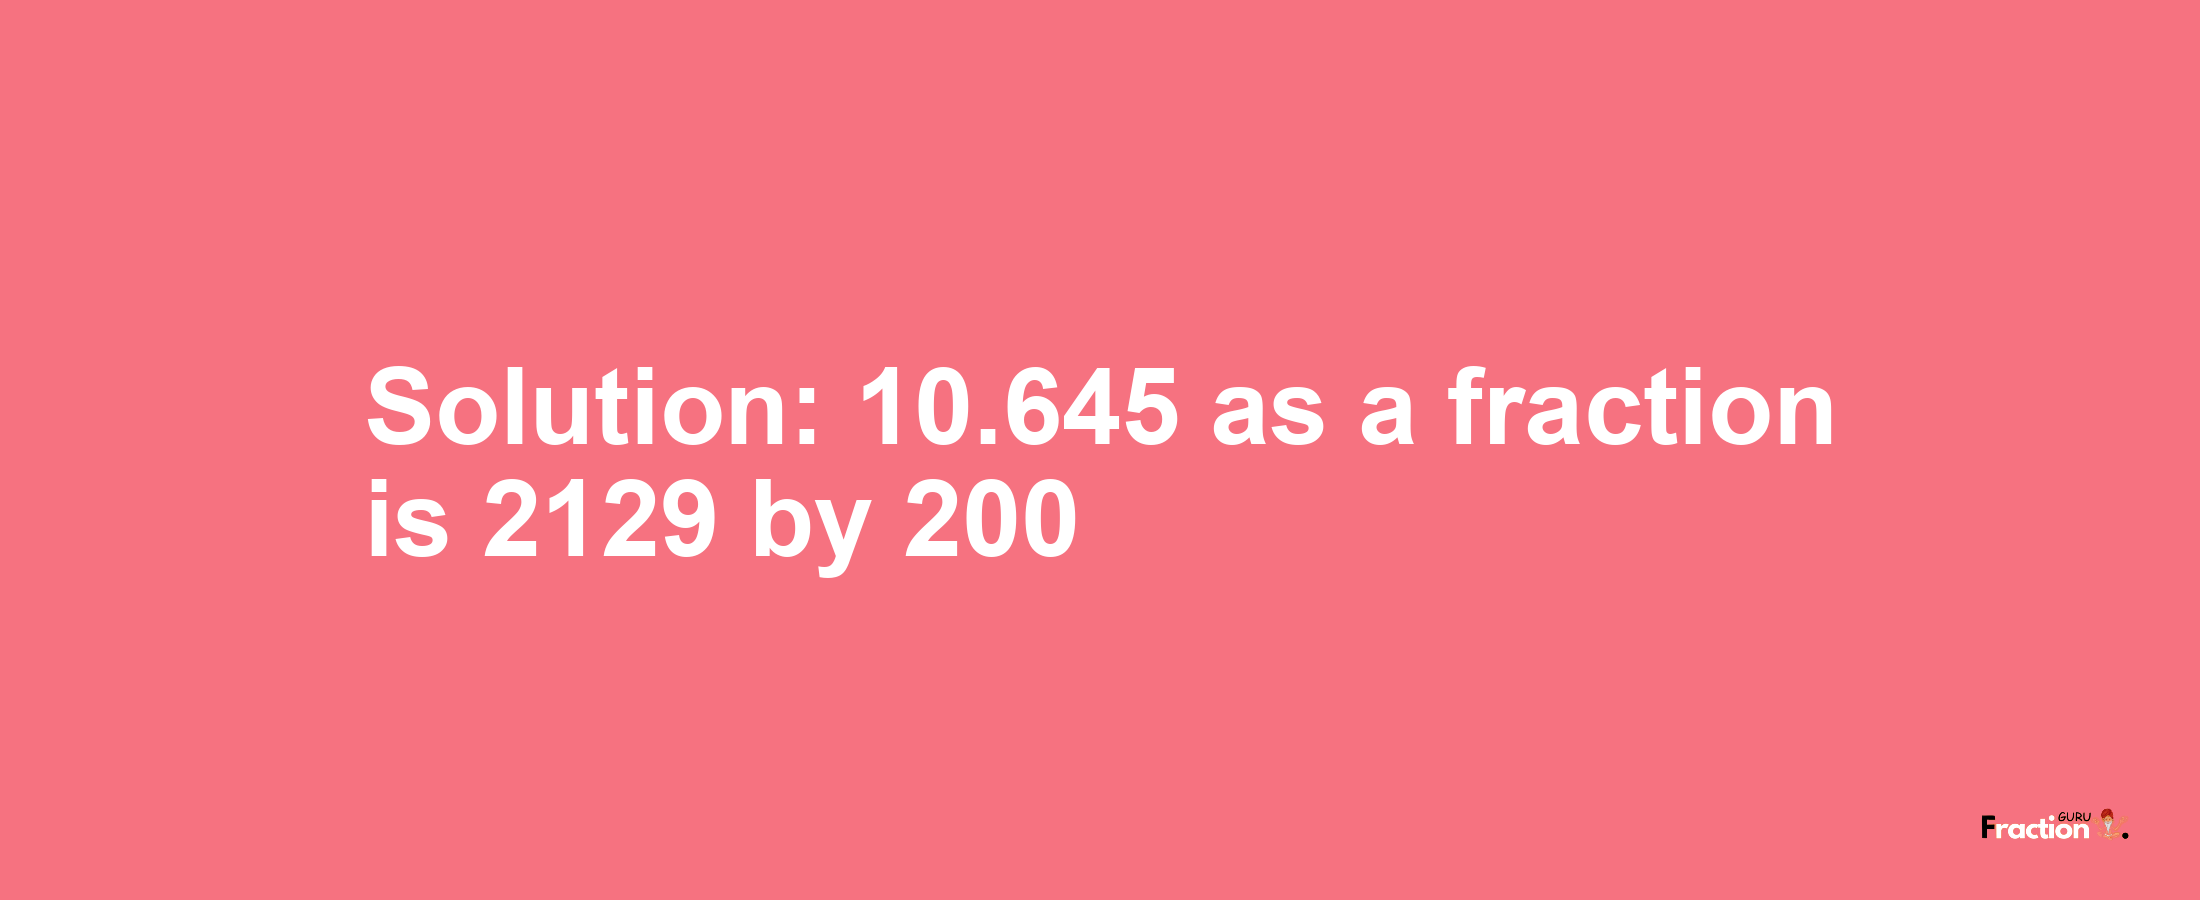 Solution:10.645 as a fraction is 2129/200